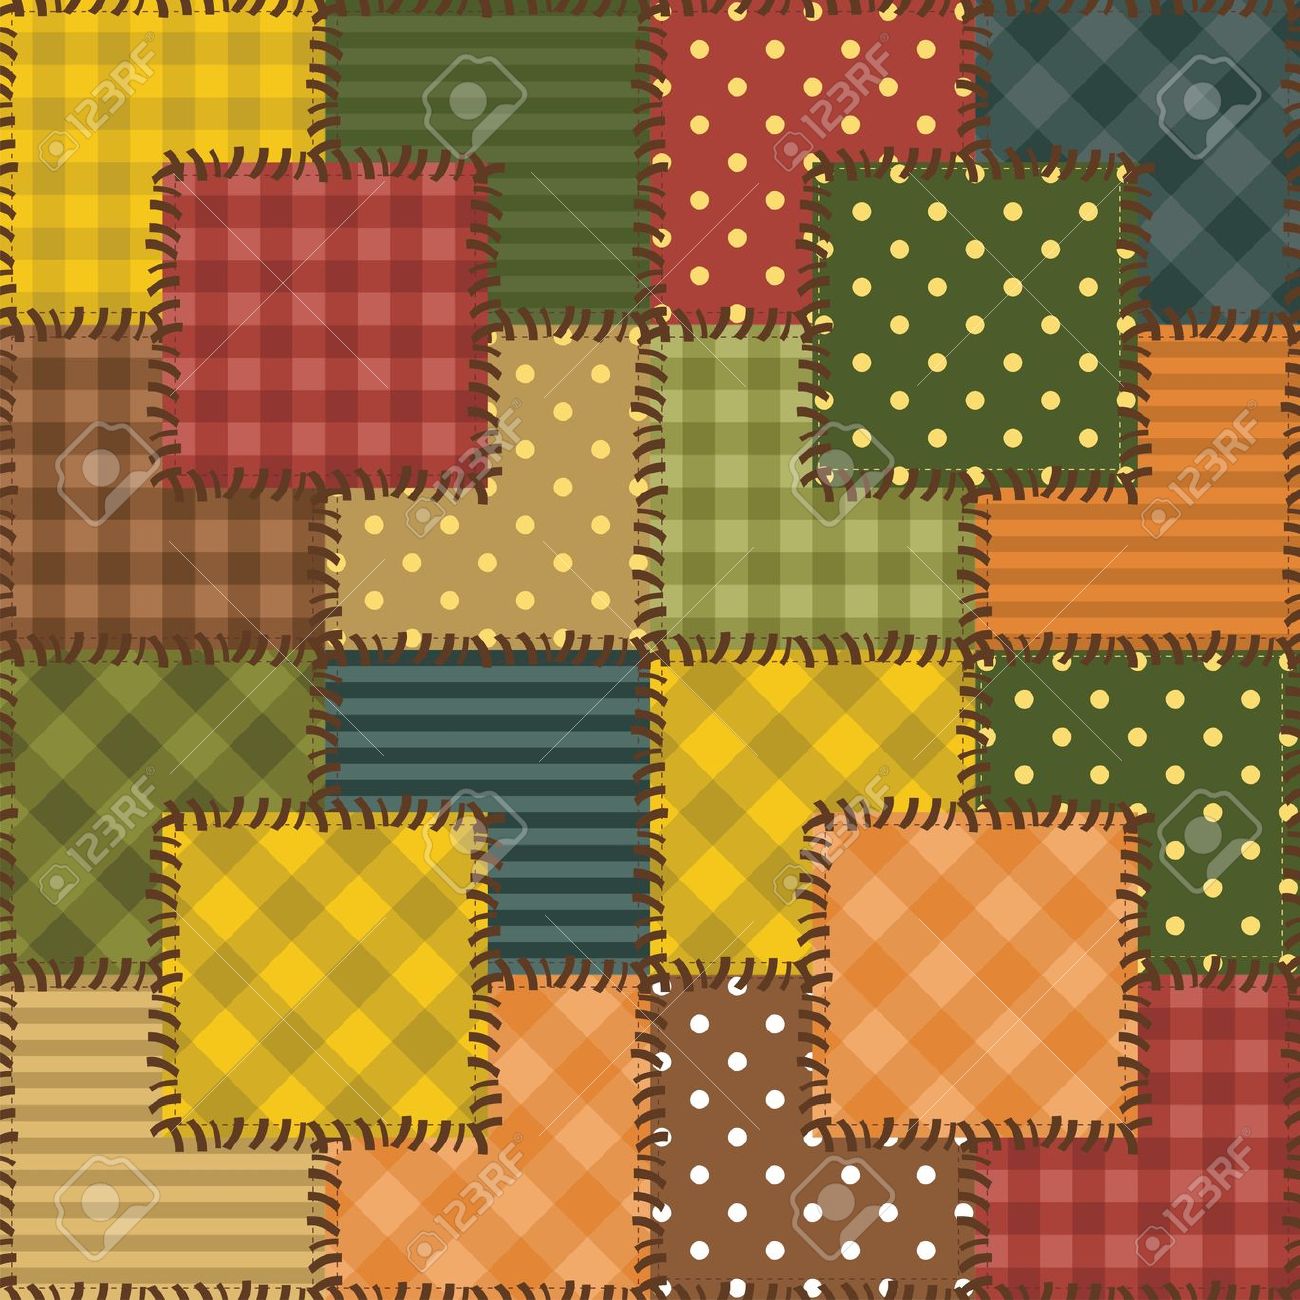 Quilted background clipart - Clipground